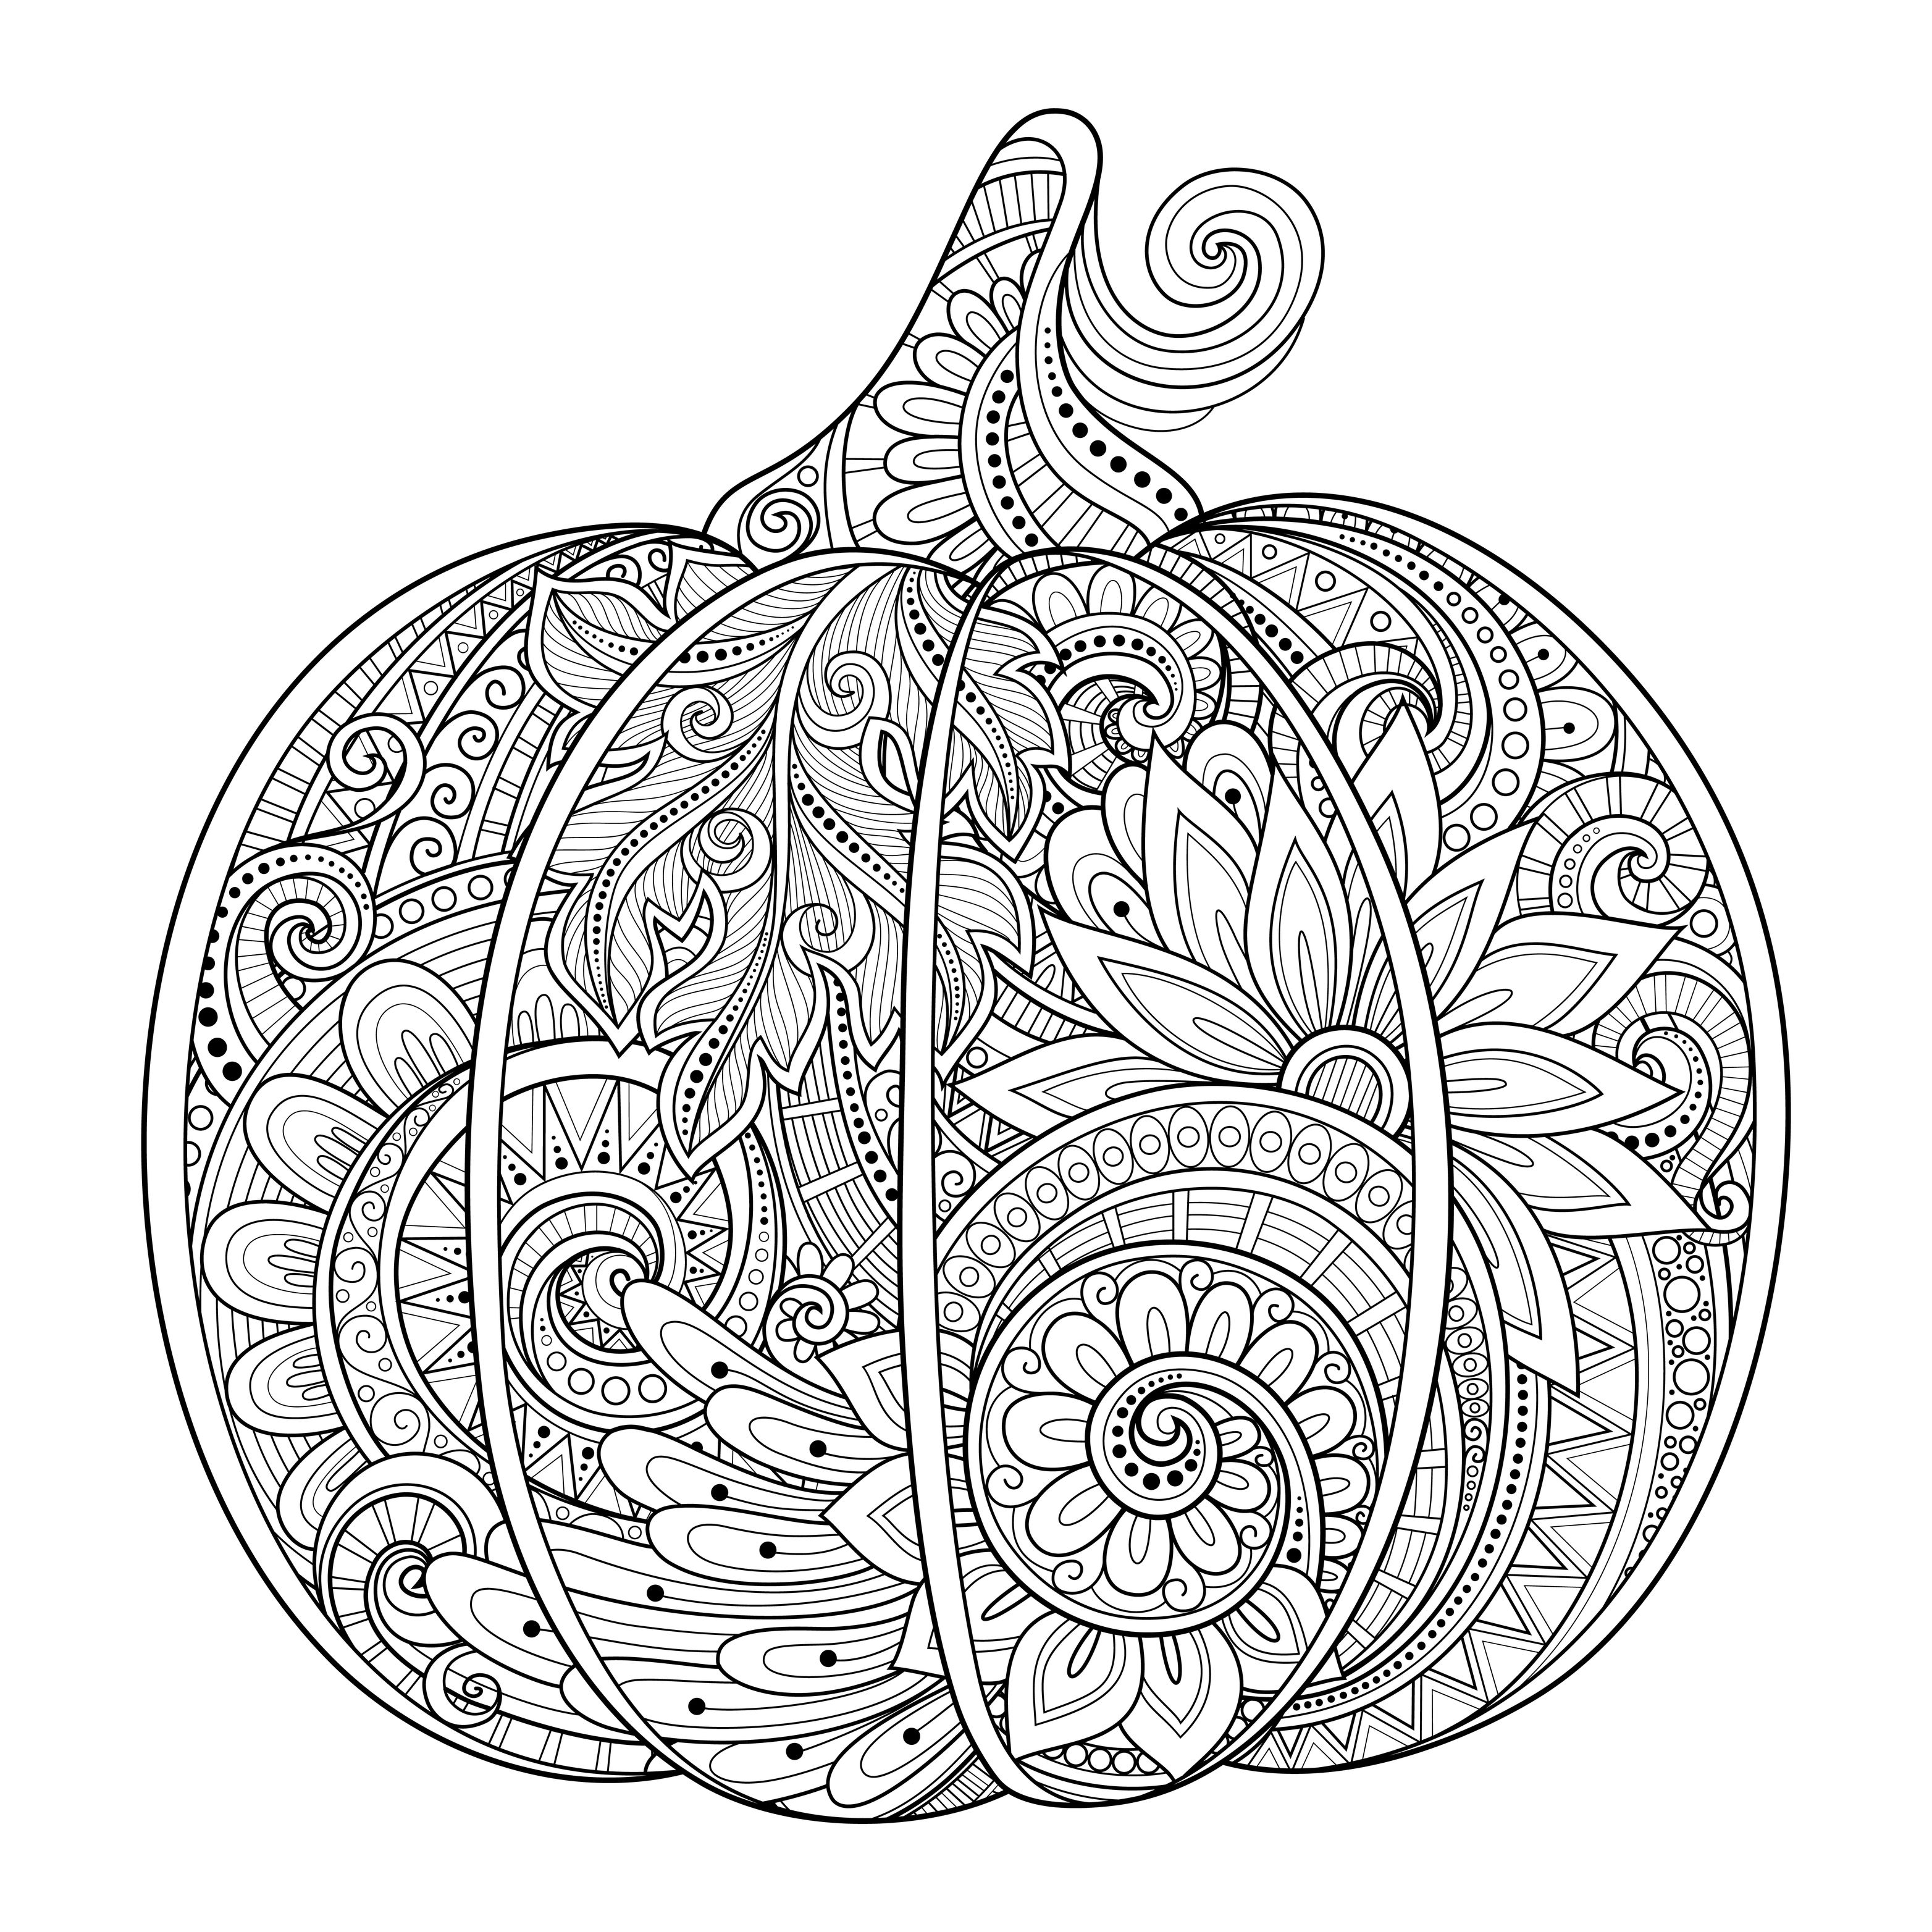 10 Free Autumn Adult Coloring Pages | Raining Crafts & Dogs